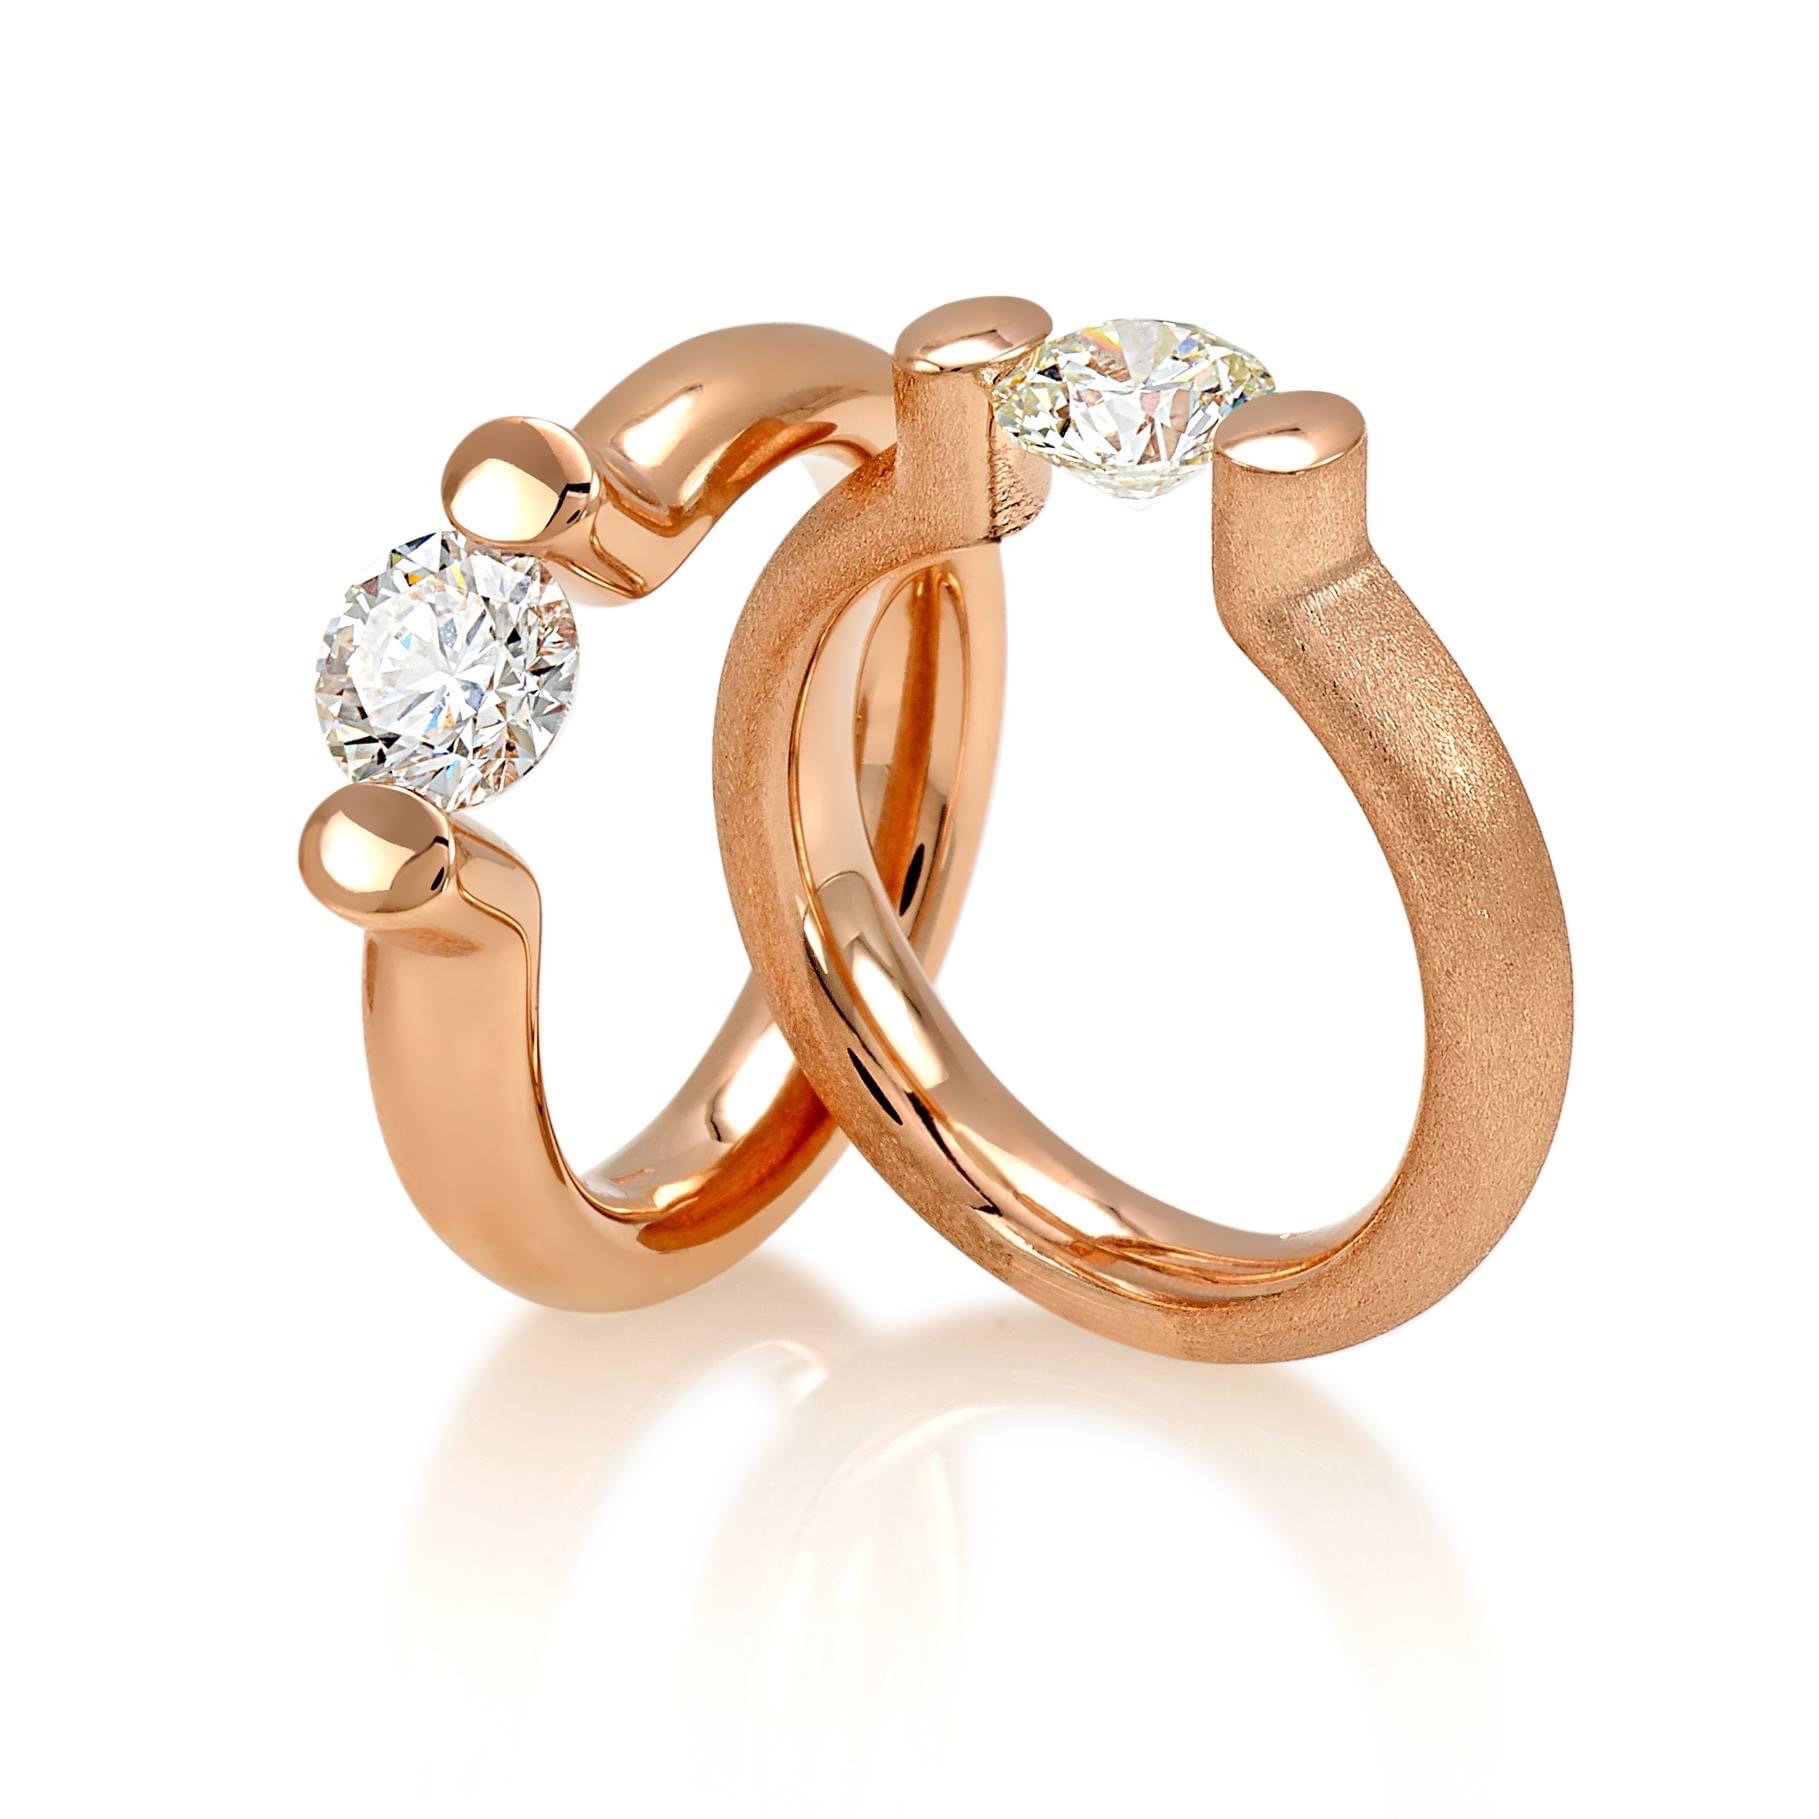 Solitaire ring in gold and diamond Art. R02627RA01-A